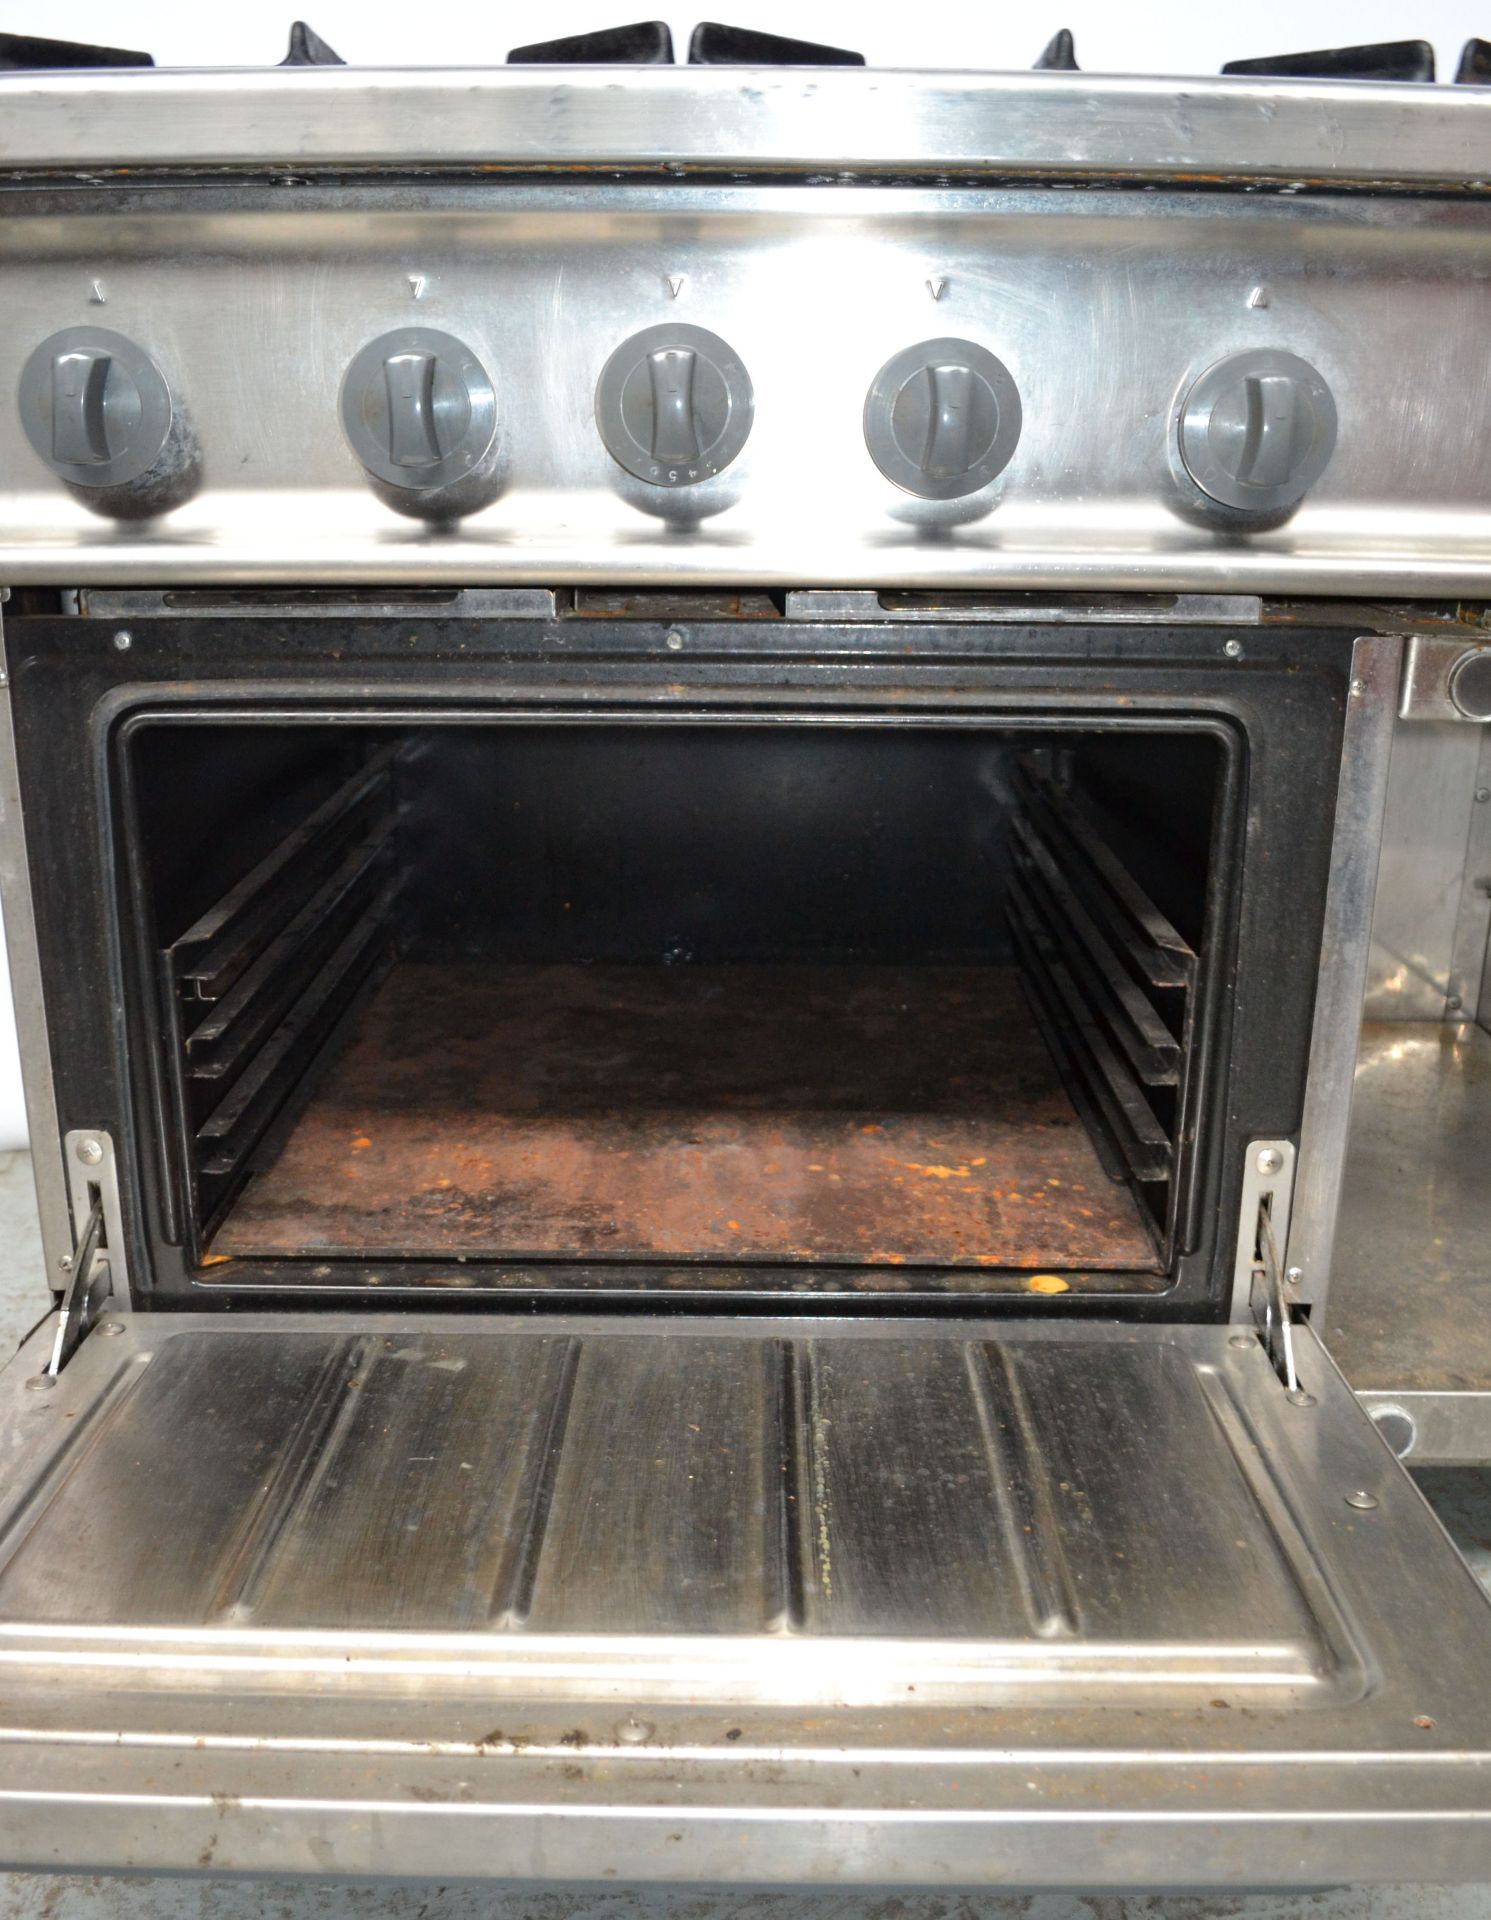 1 x Fagor Six Burner Gas Oven Range (CG-761 BR SM) - Ref NCE011 - CL178 - Location: Altrincham - Image 8 of 15